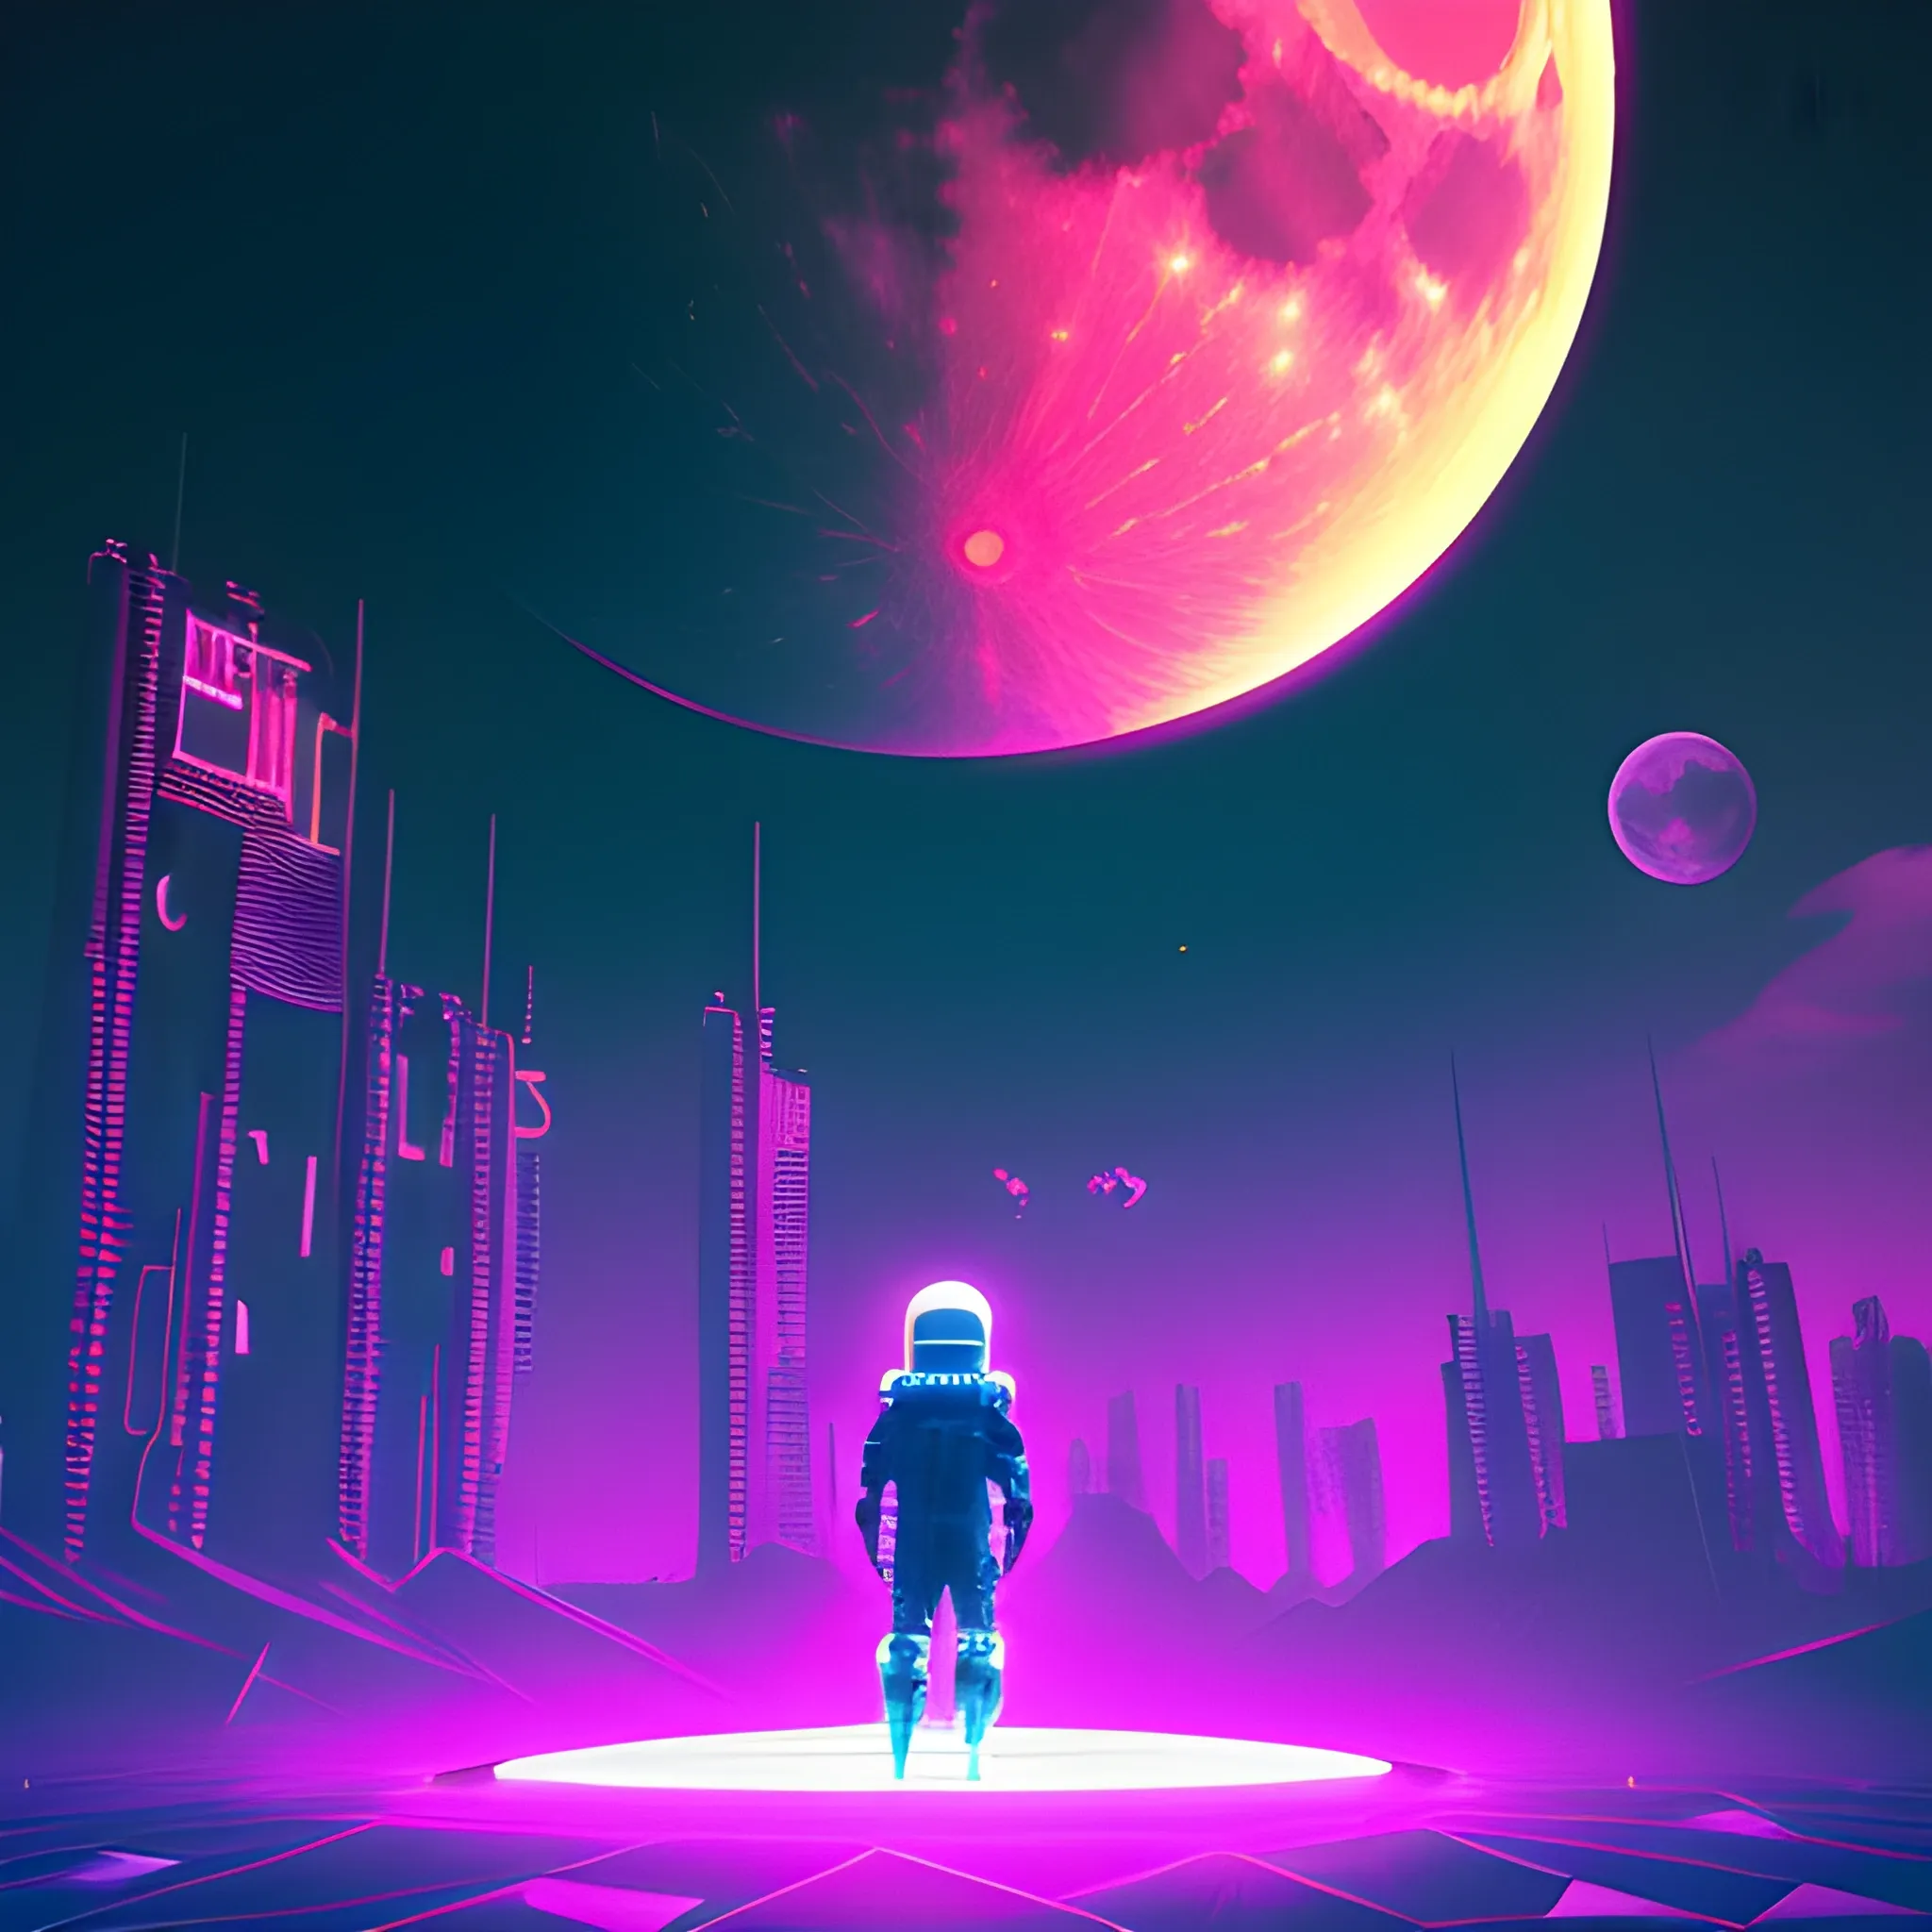 video game, abstract, wallpaper, world without man, neon color around, techno neon, high definition, bright and sweet, big moon, image composition, color harmony, contrast, lighting, no hero, 3D